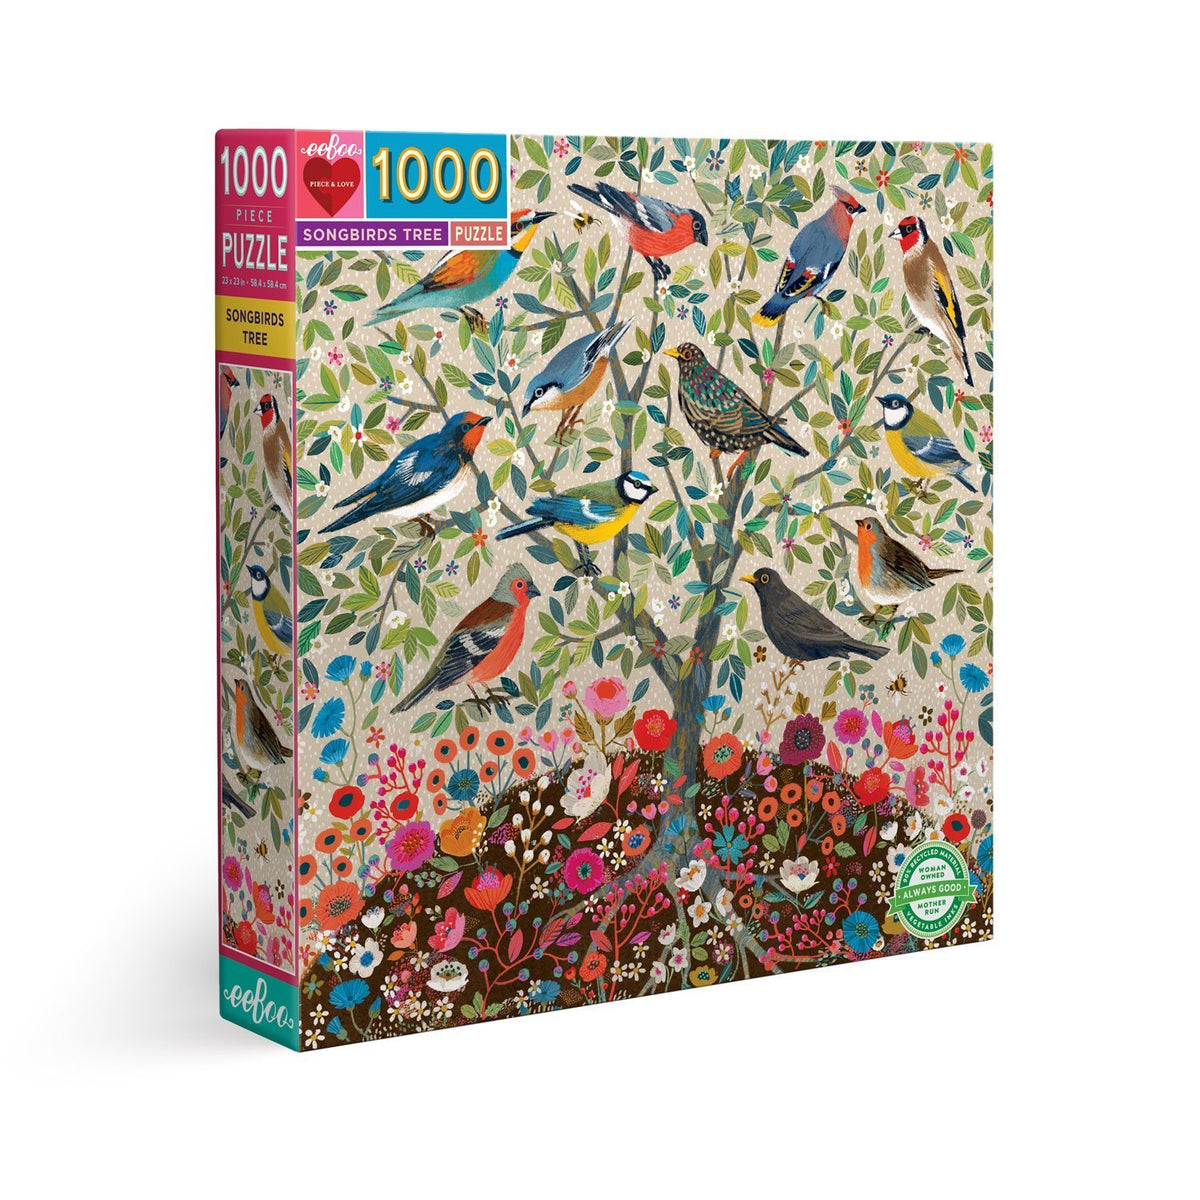 Songbirds Tree 1000 Piece Puzzle - Heart of the Home PA